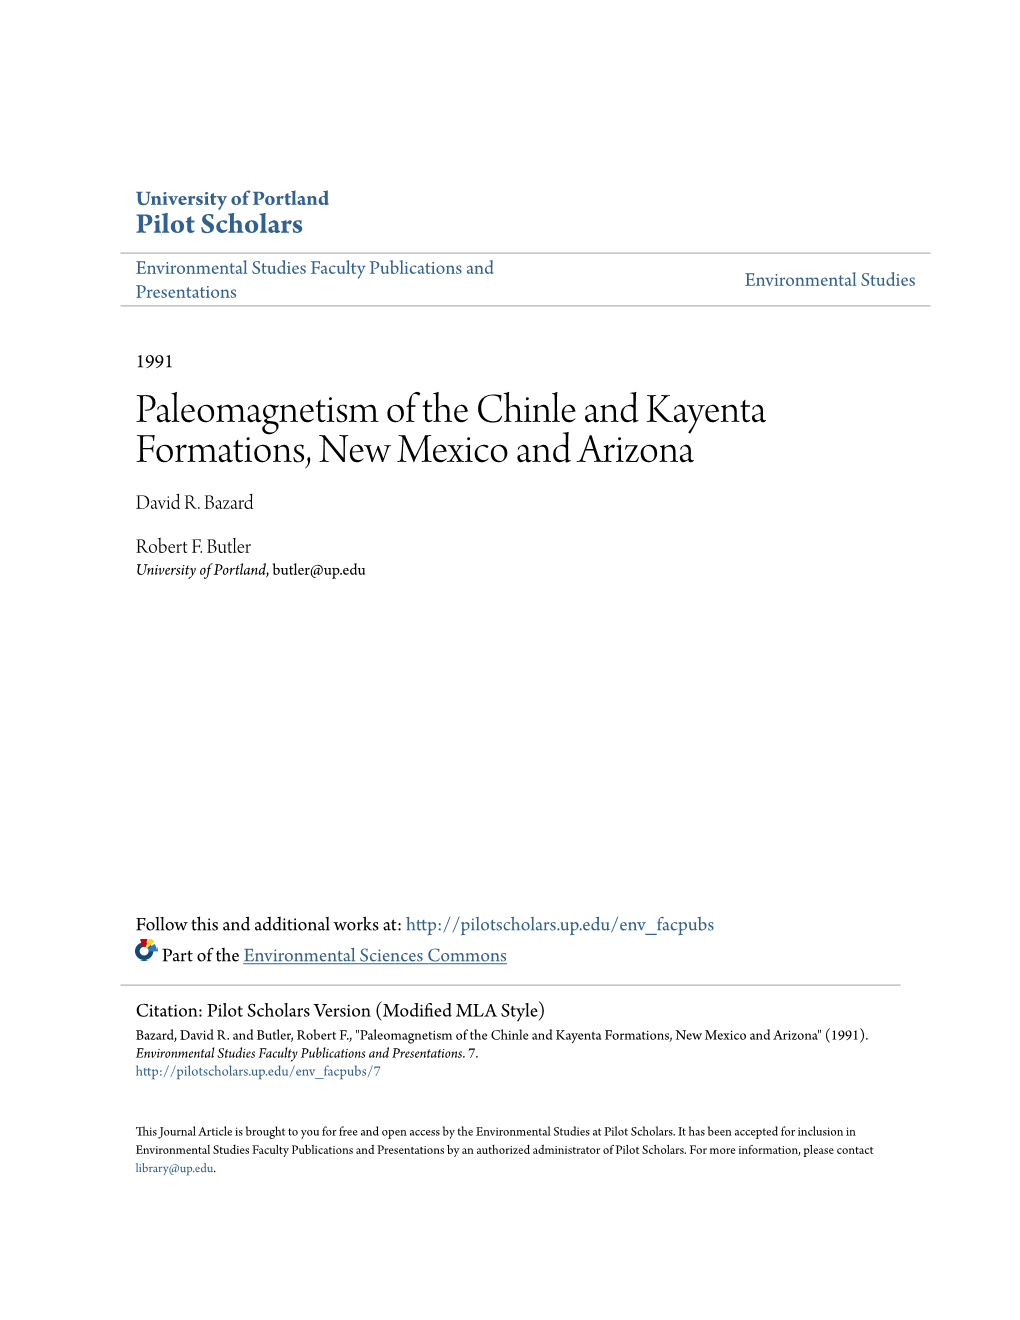 Paleomagnetism of the Chinle and Kayenta Formations, New Mexico and Arizona David R